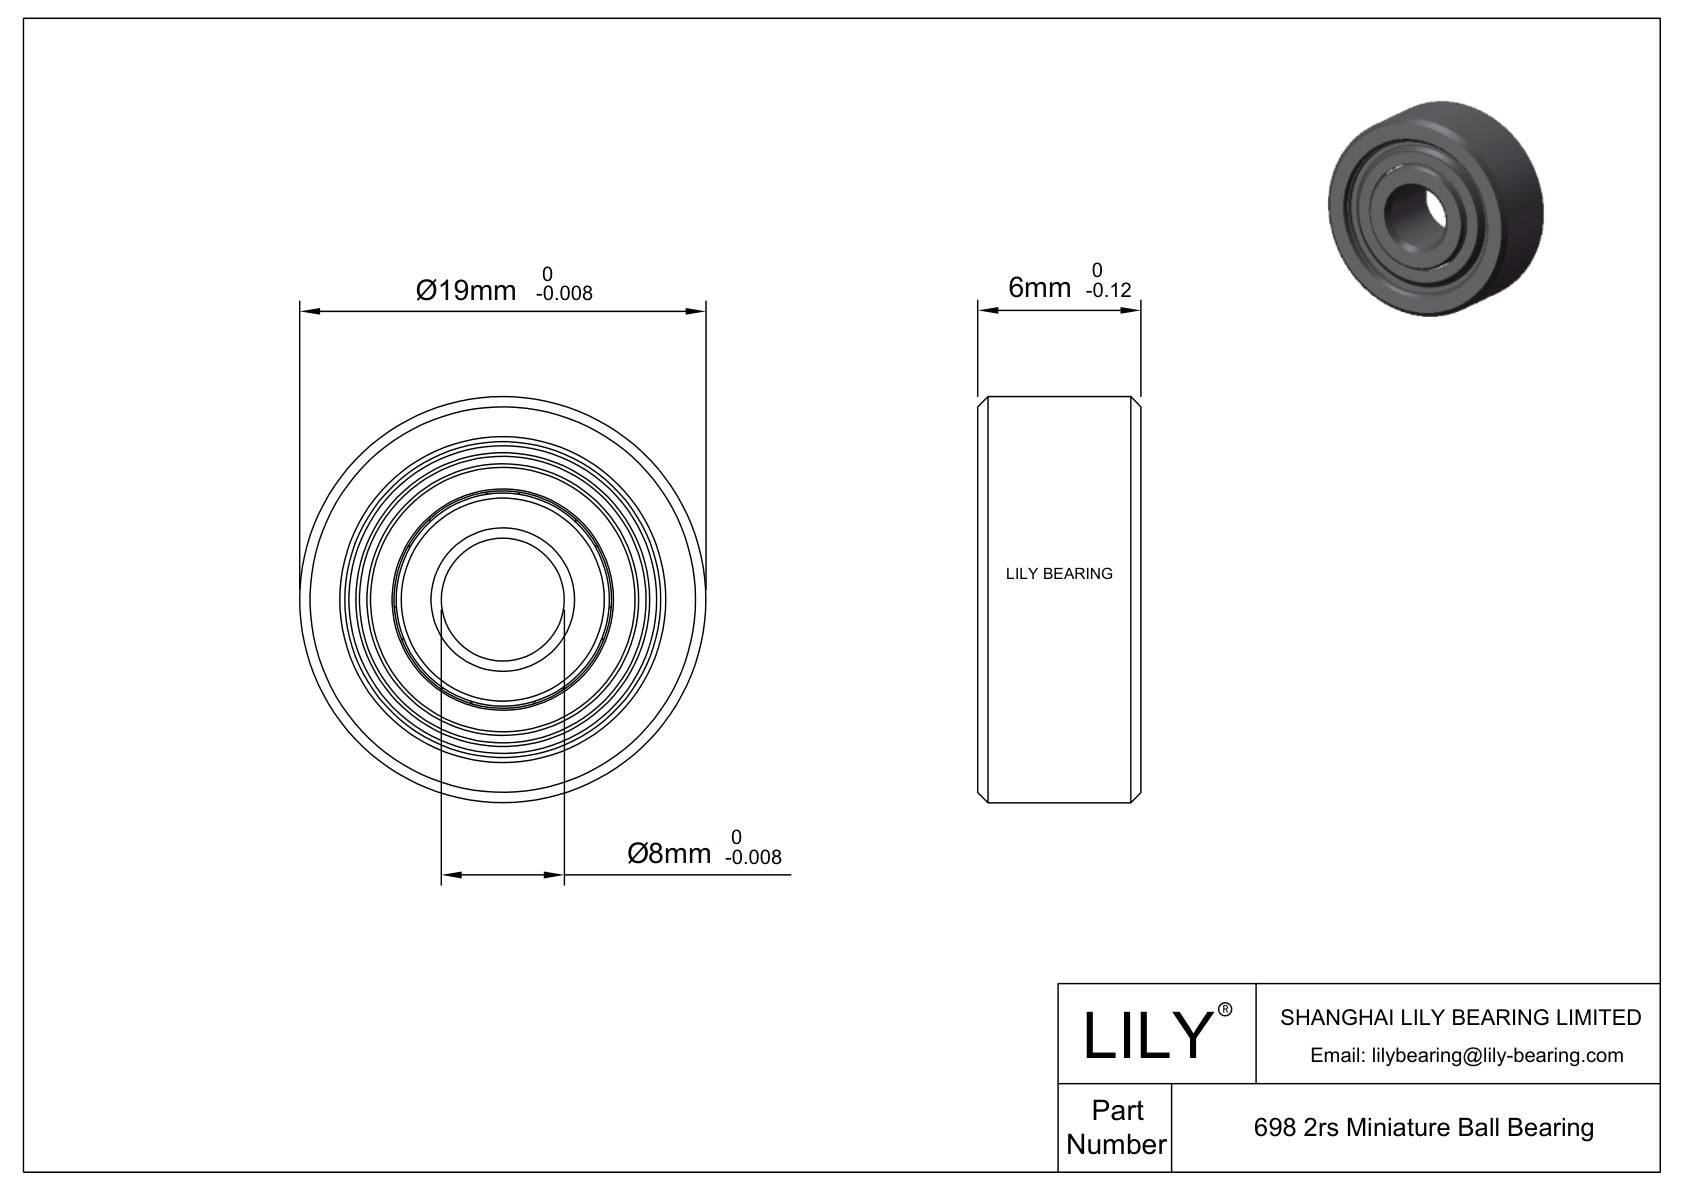 LILY-PUT69840-40 Outsourcing Polyurethane bearings cad drawing